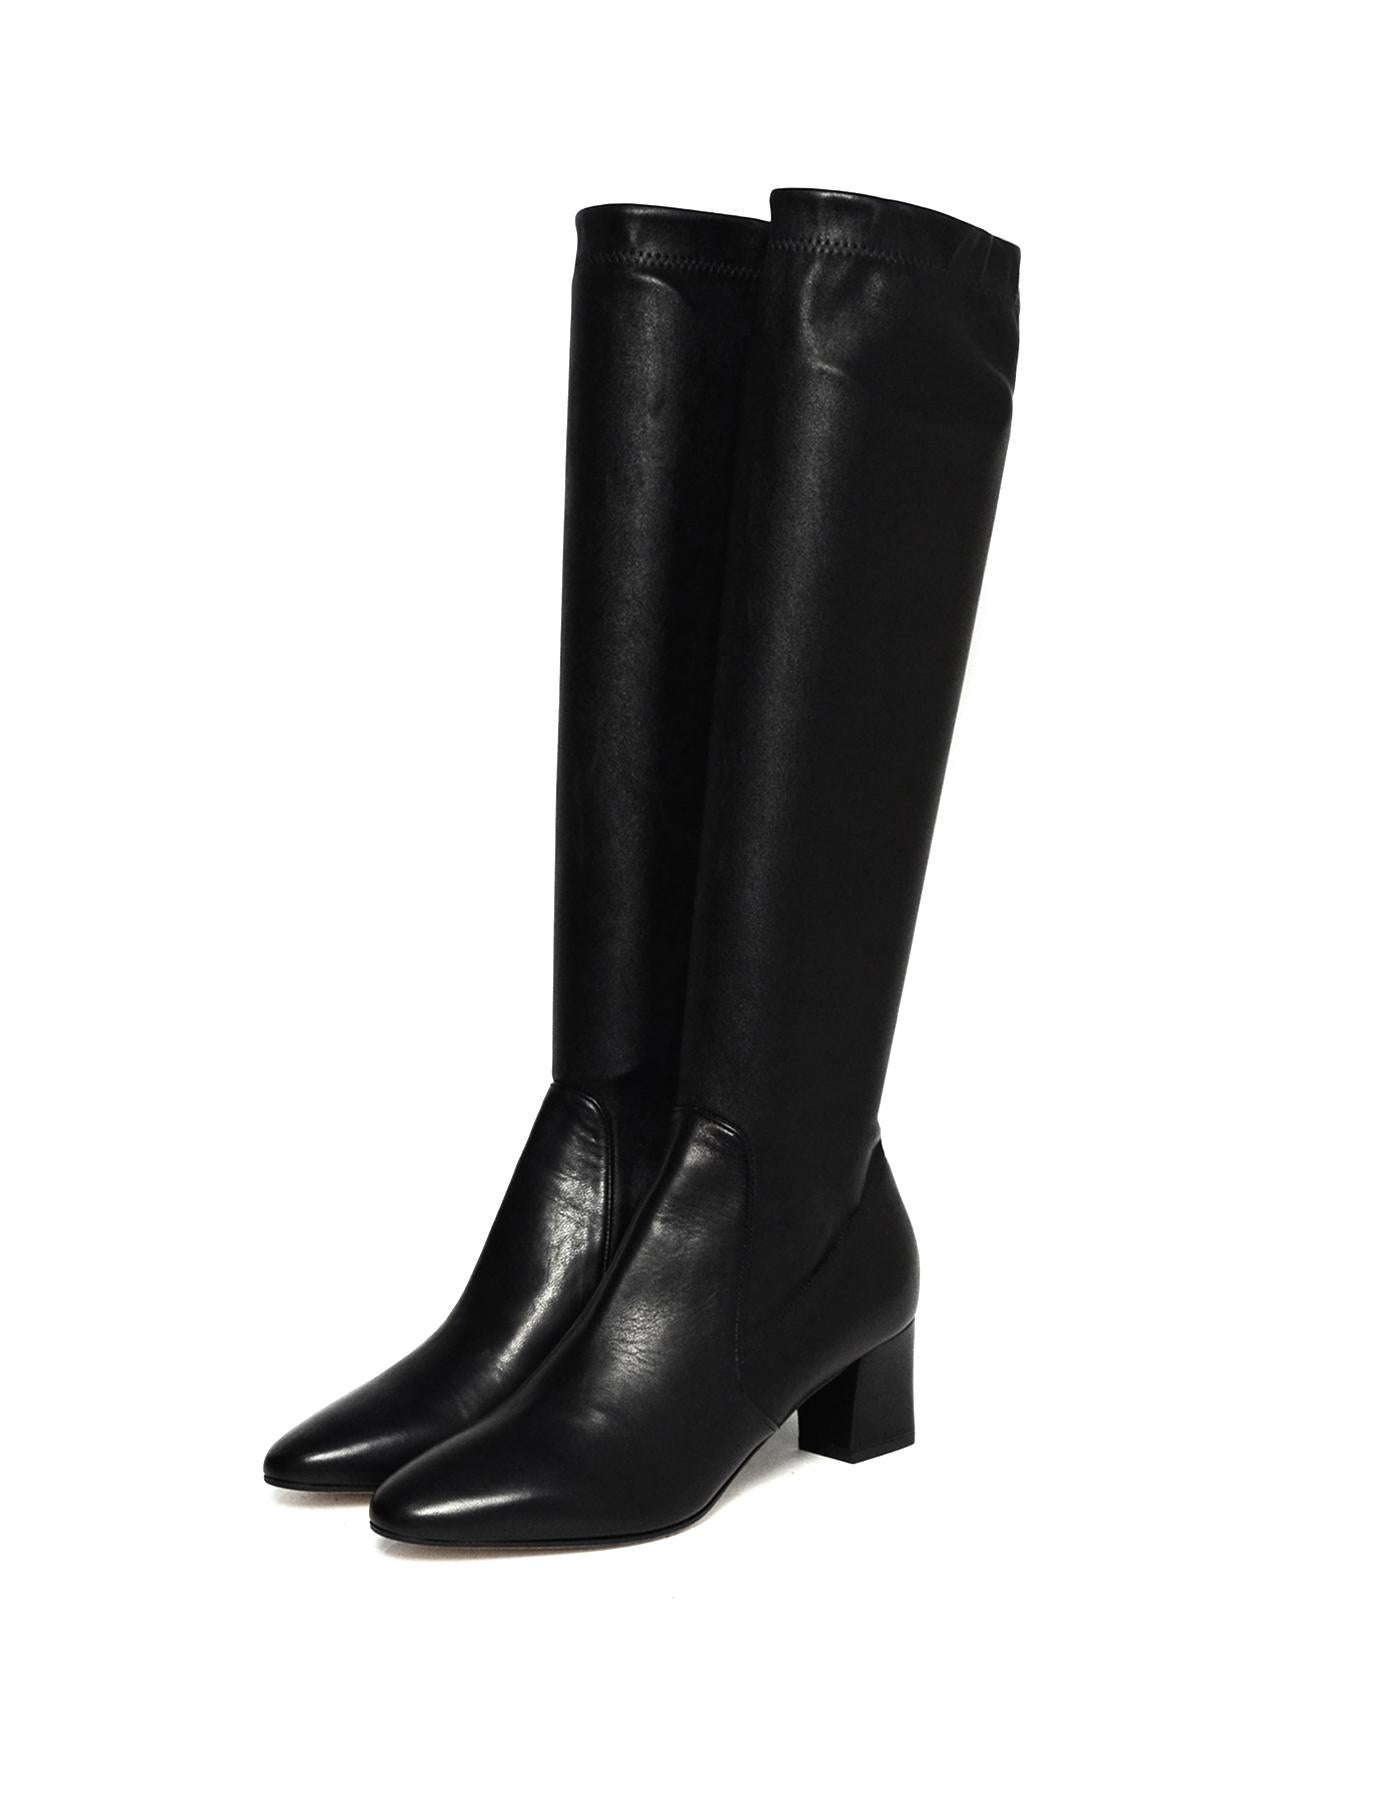 Tamara Mellon Black Helmut Knee High Stretch Boots sz 37.5

Made In: Italy
Color: Black
Materials: Leather
Closure/Opening: Slide on
Overall Condition: Excellent pre-owned condition, with the exception of minor wear to soles
Estimated Retail: $795 +